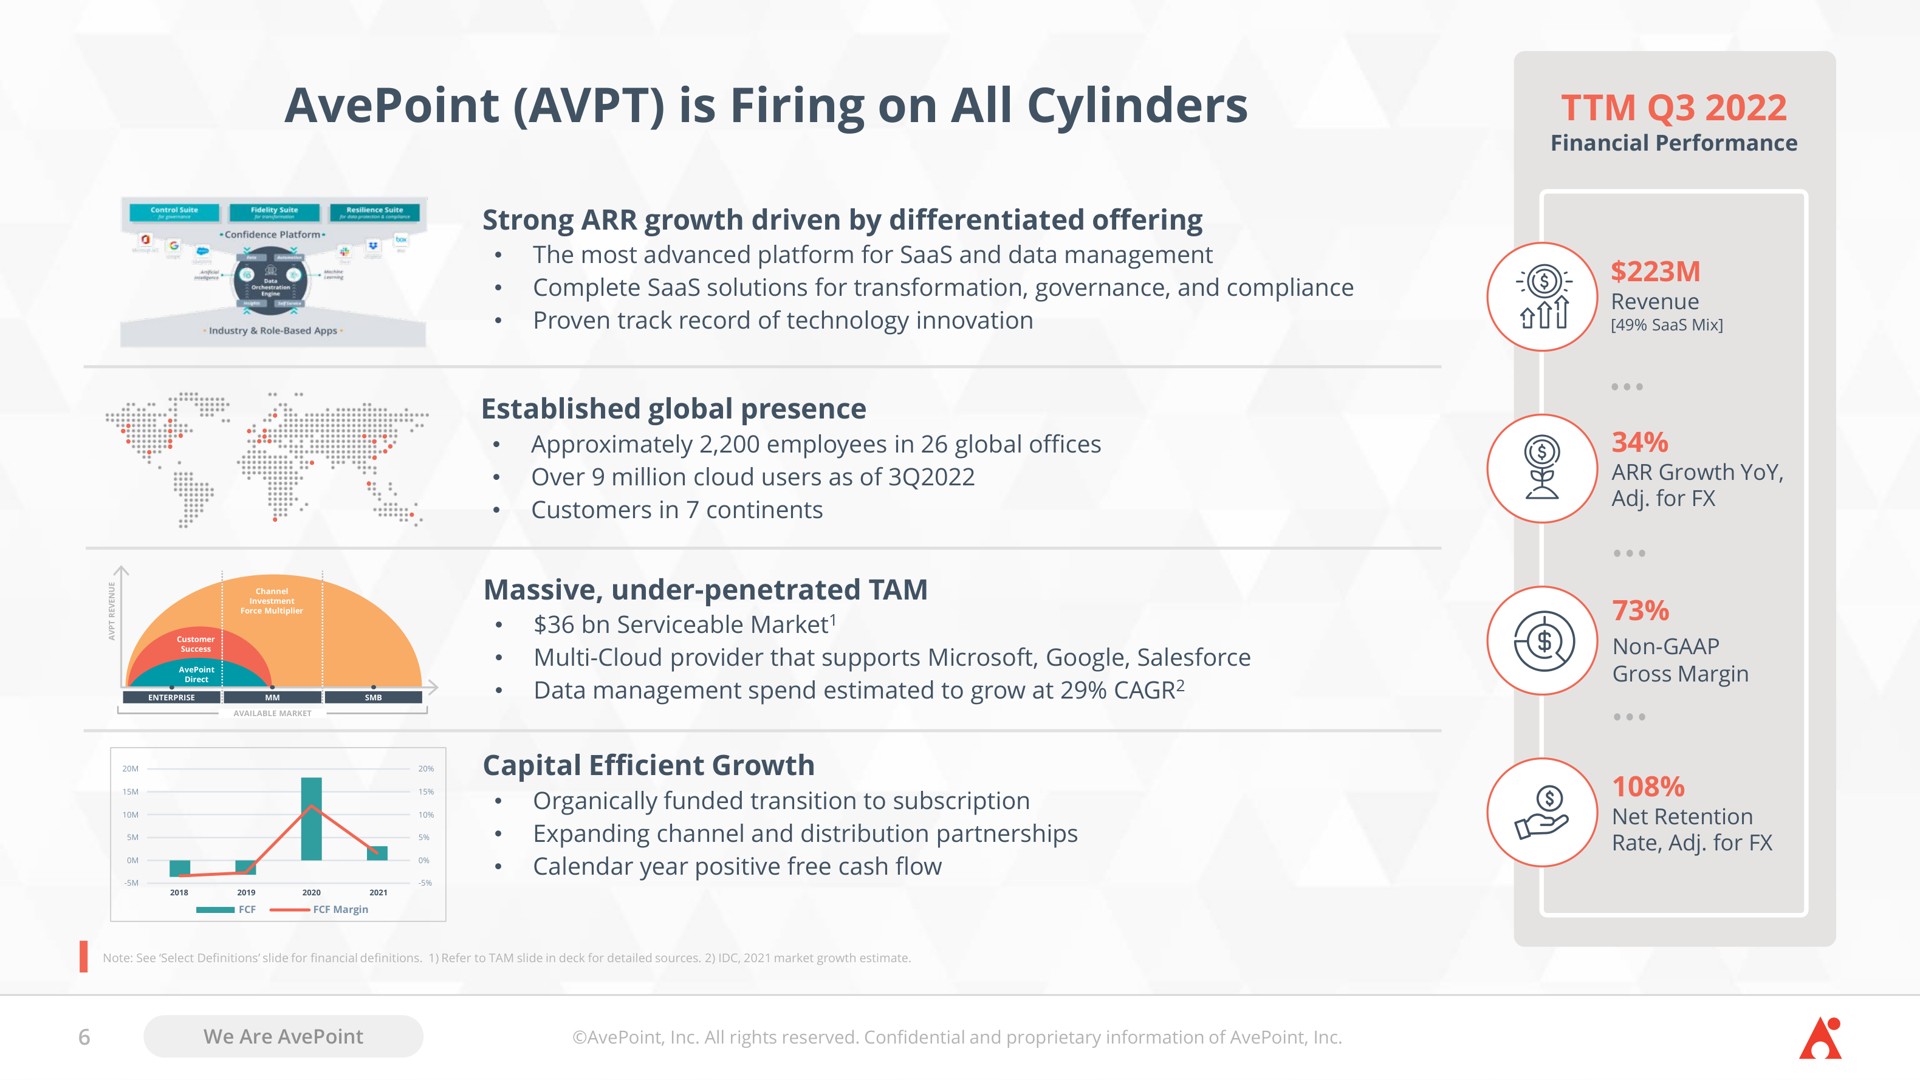 is firing on all cylinders | AvePoint